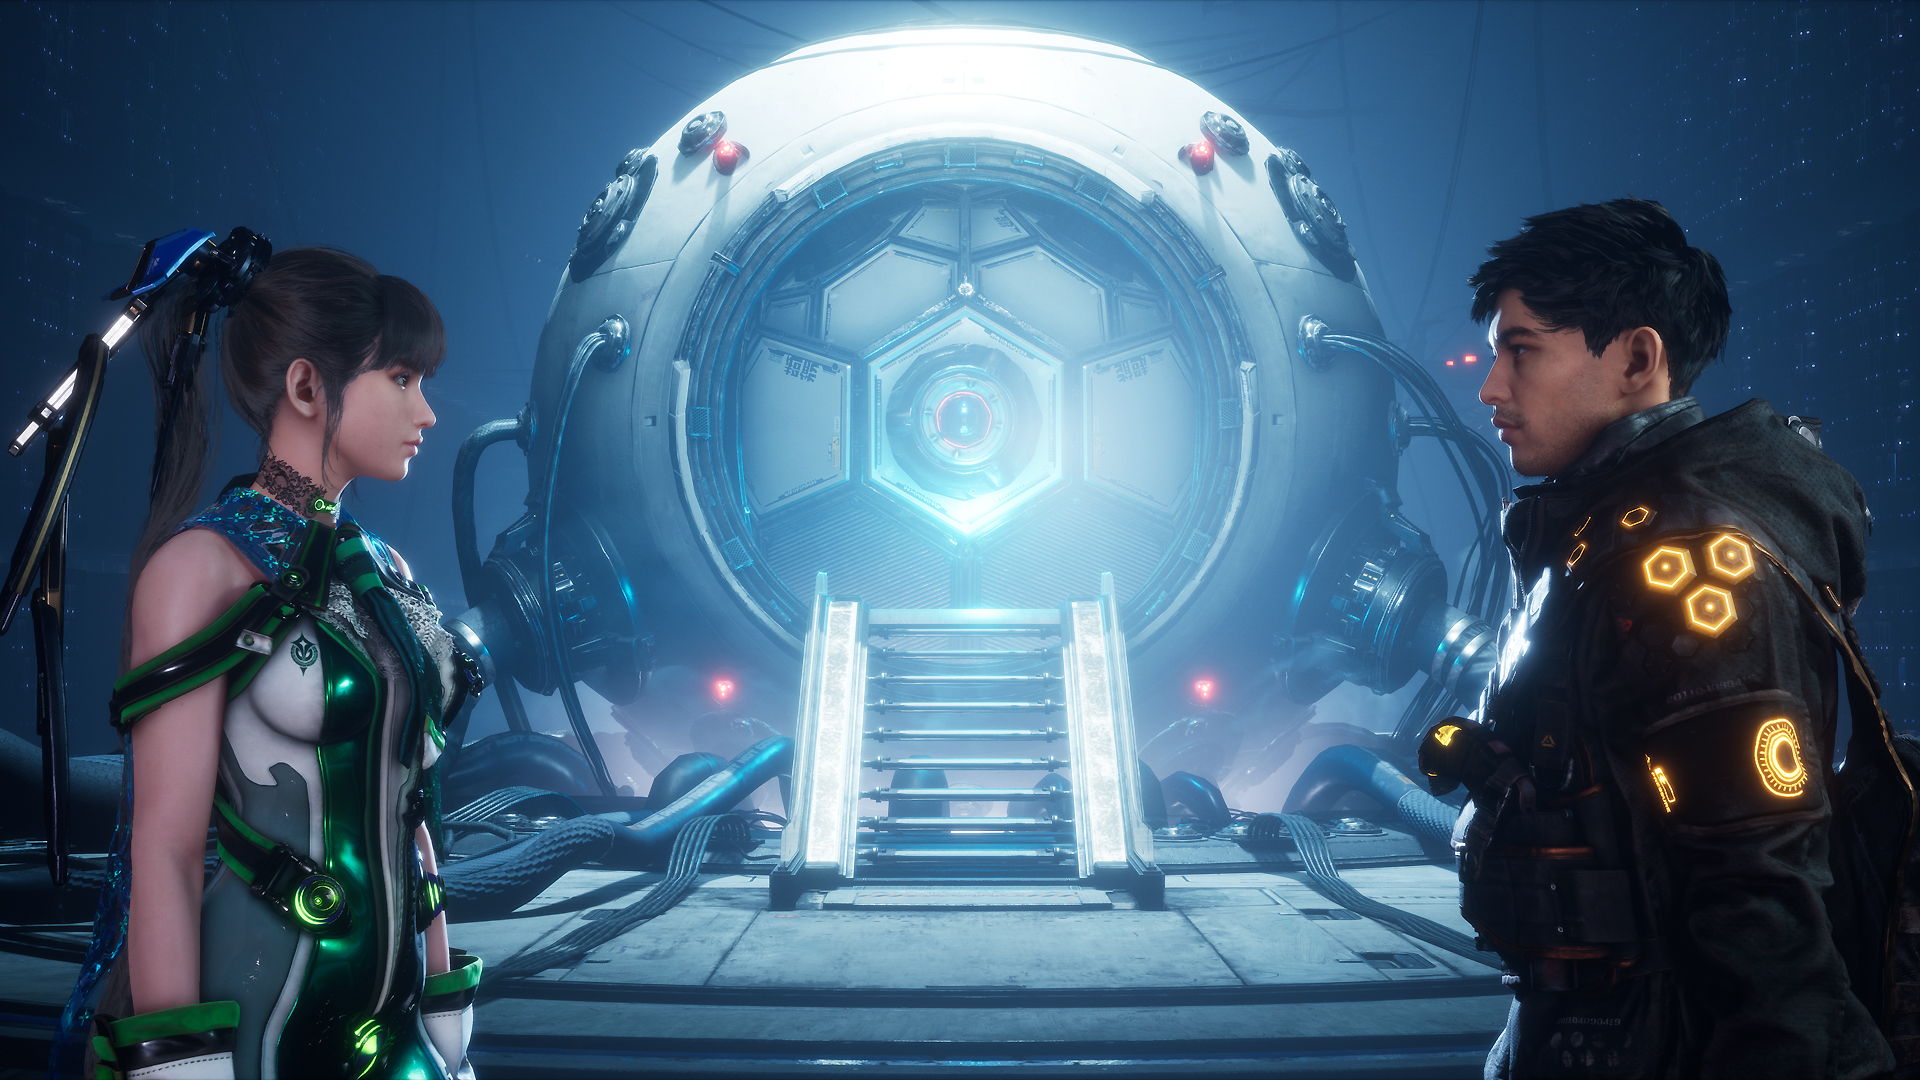 Eve and her companion stand opposite each other, in the background a staircase leads up to a futuristic-looking chamber whose door glows blue.